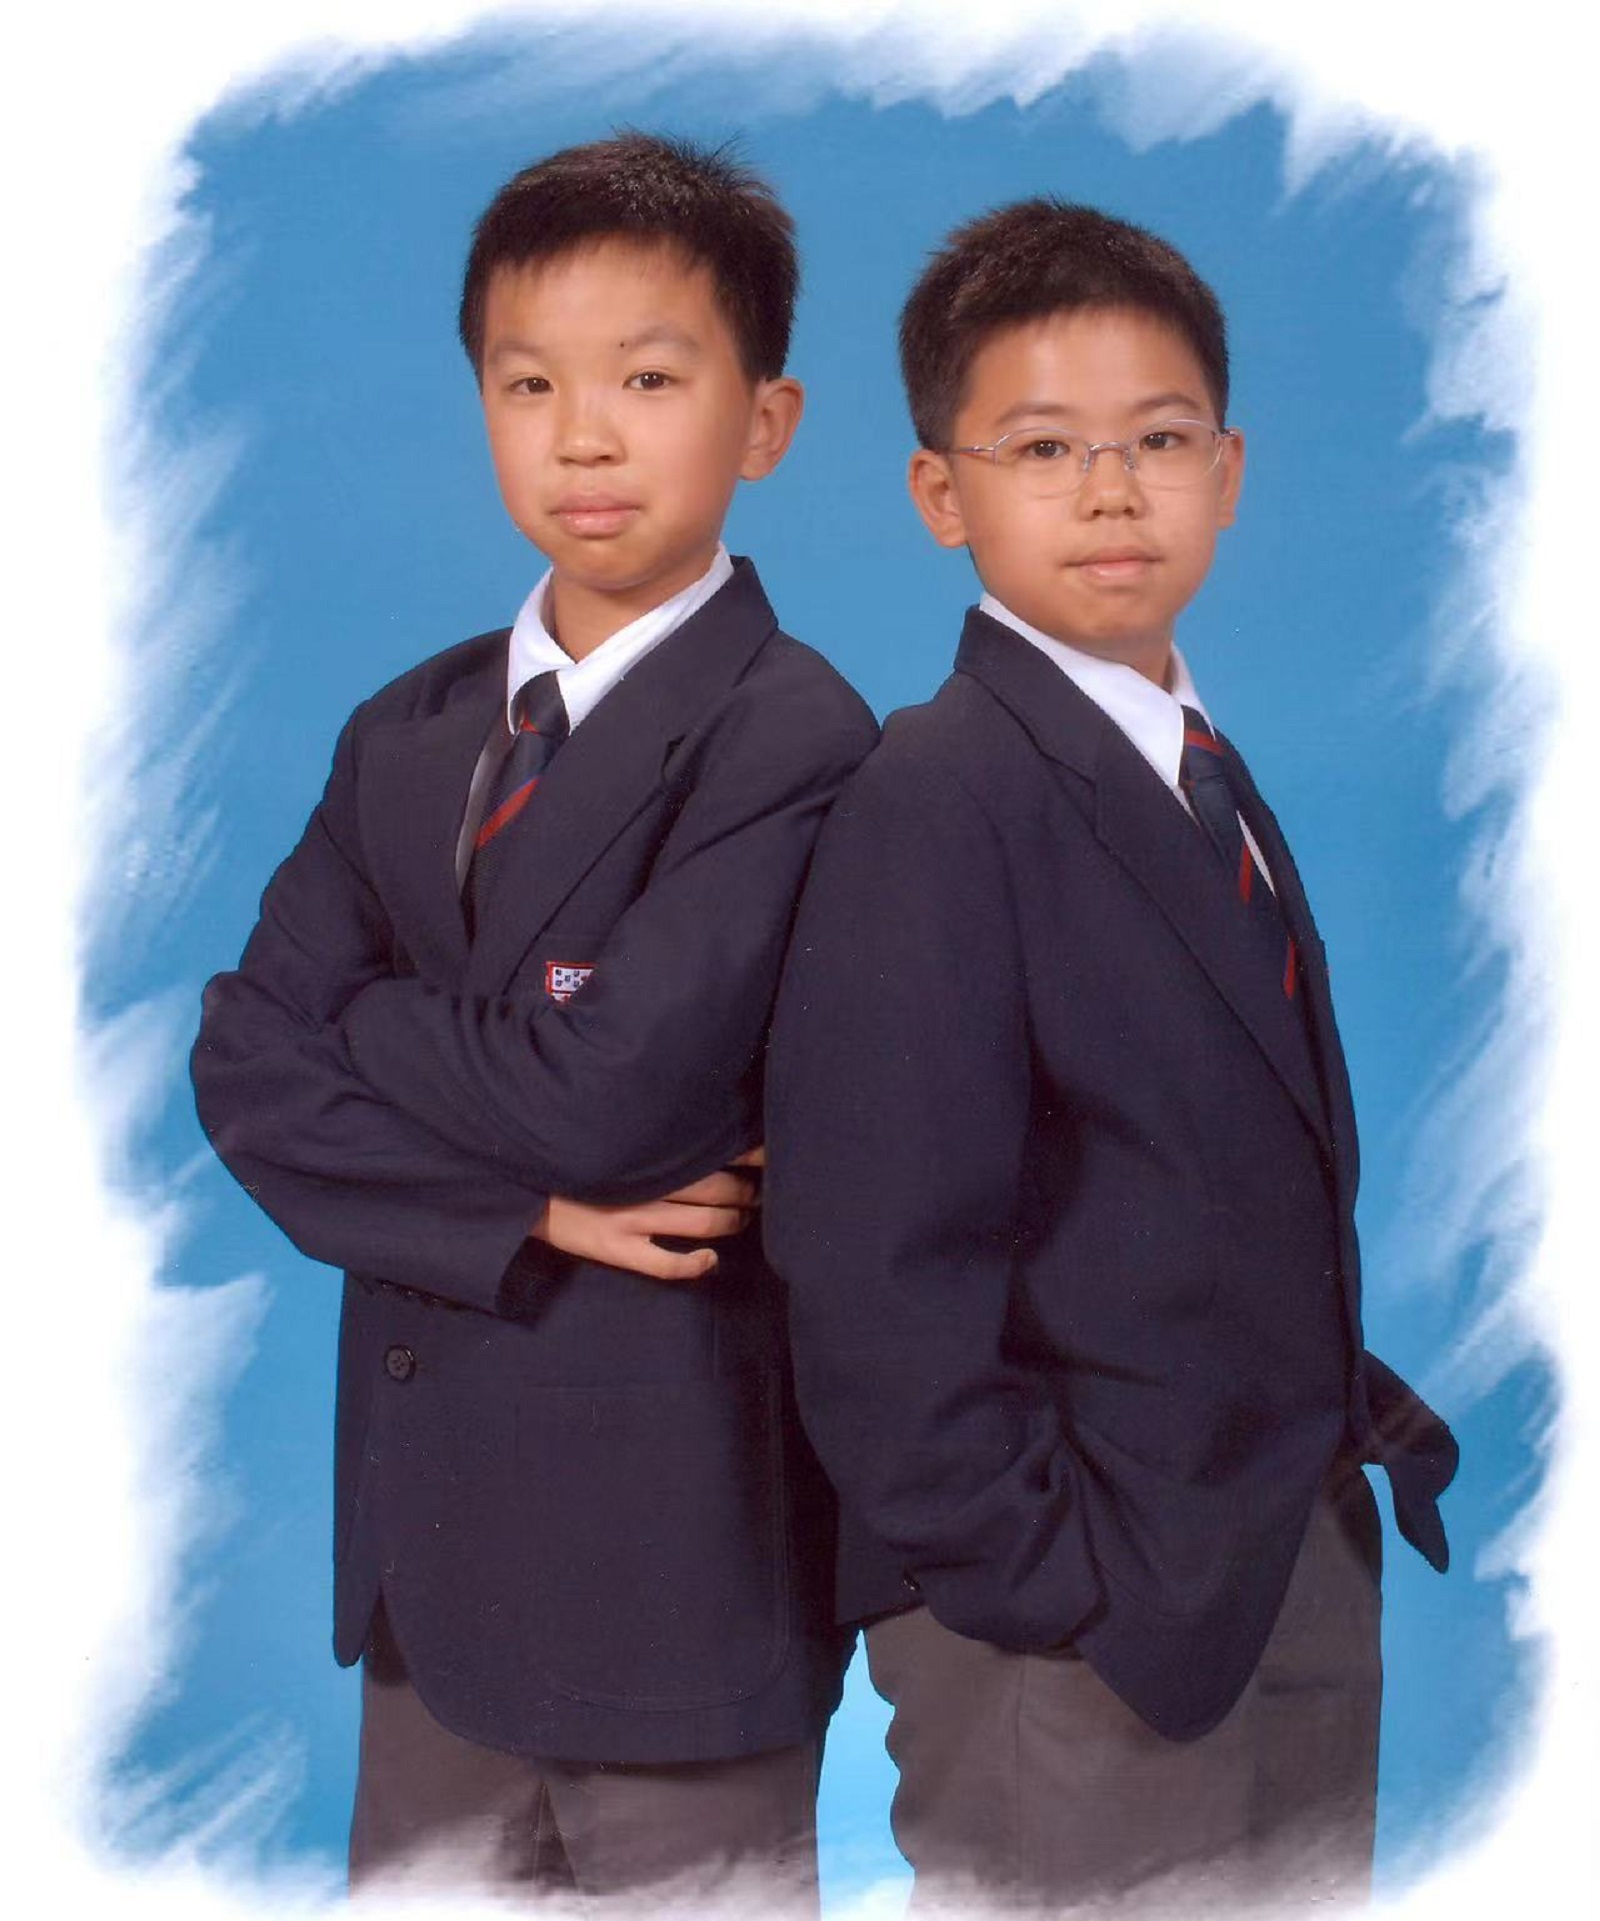 Kim with his brother Ben at a school photoshoot